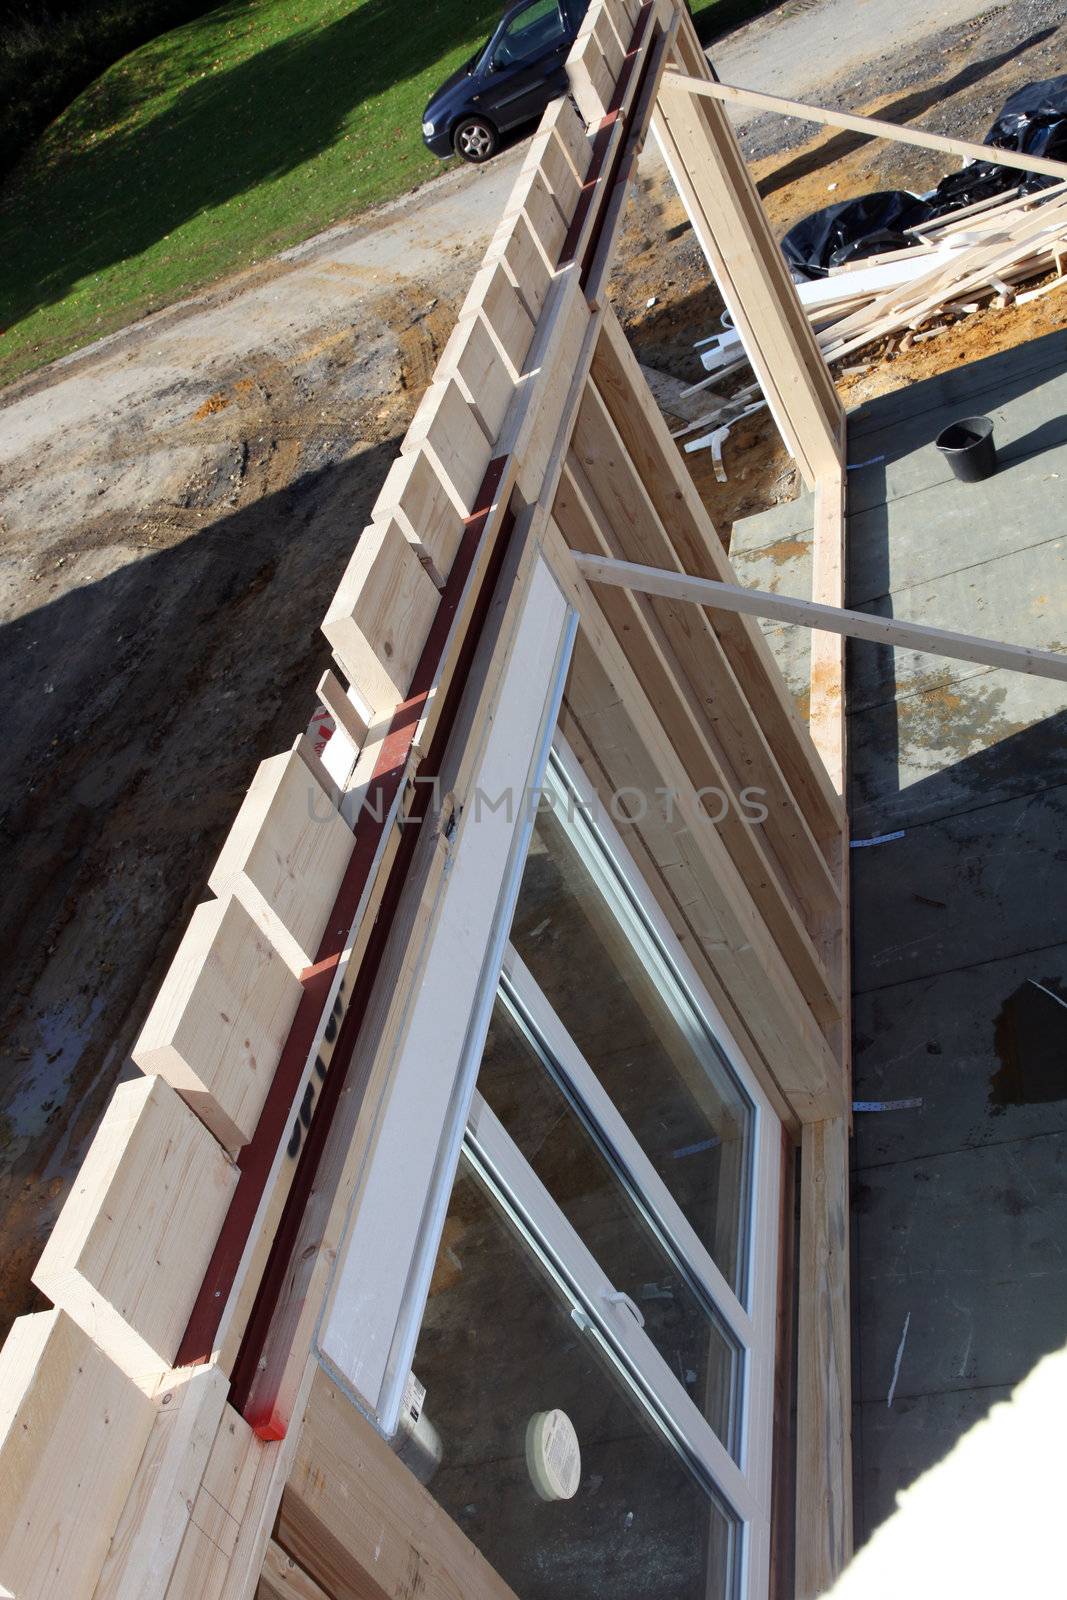 Newbuild timber wall with glass doors being held upright by supports during installation on a residential building site